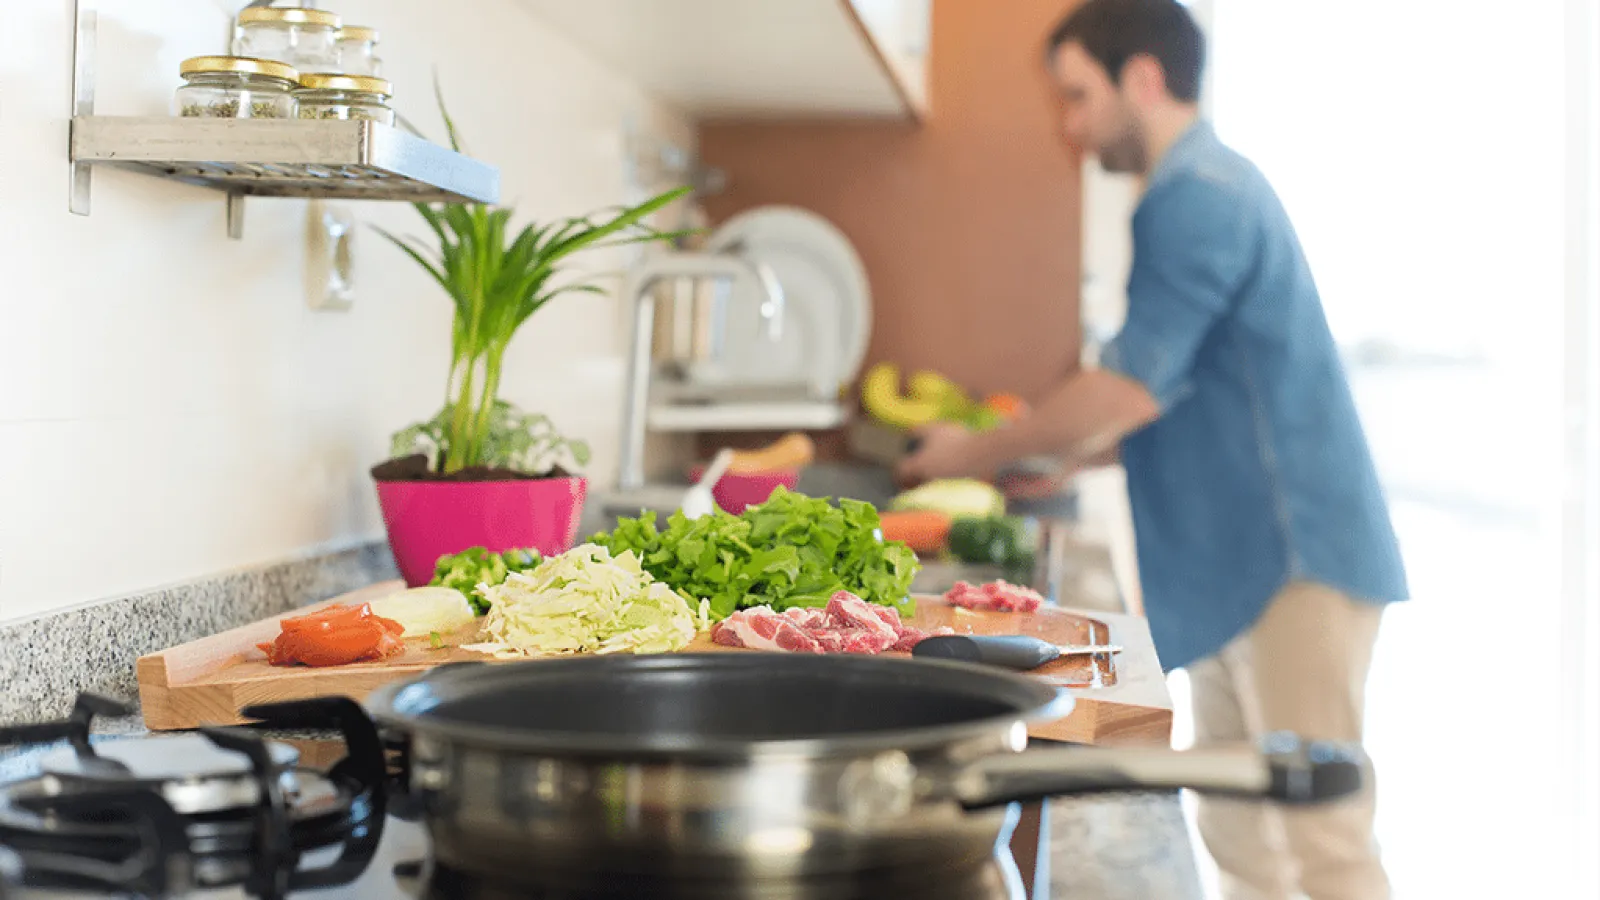 Holiday Cooking Mistakes That Can Cripple Your Plumbing System